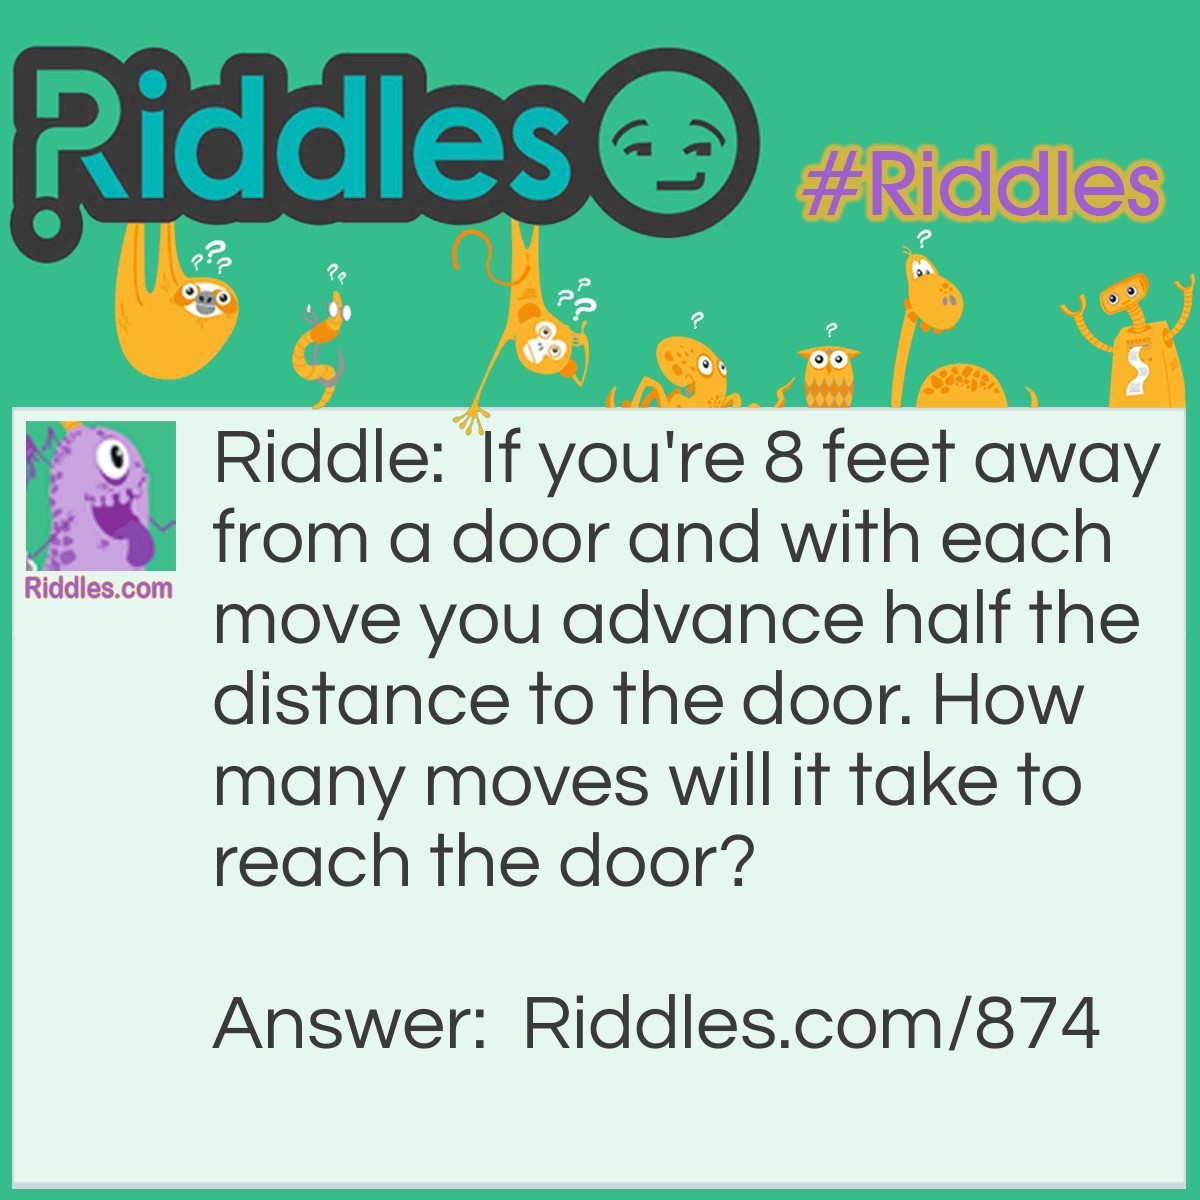 Riddle: If you're 8 feet away from a door and with each move you advance half the distance to the door. How many moves will it take to reach the door? Answer: You will never reach the door! If you only move half the distance, then you will always have half the distance remaining no matter how small the number.